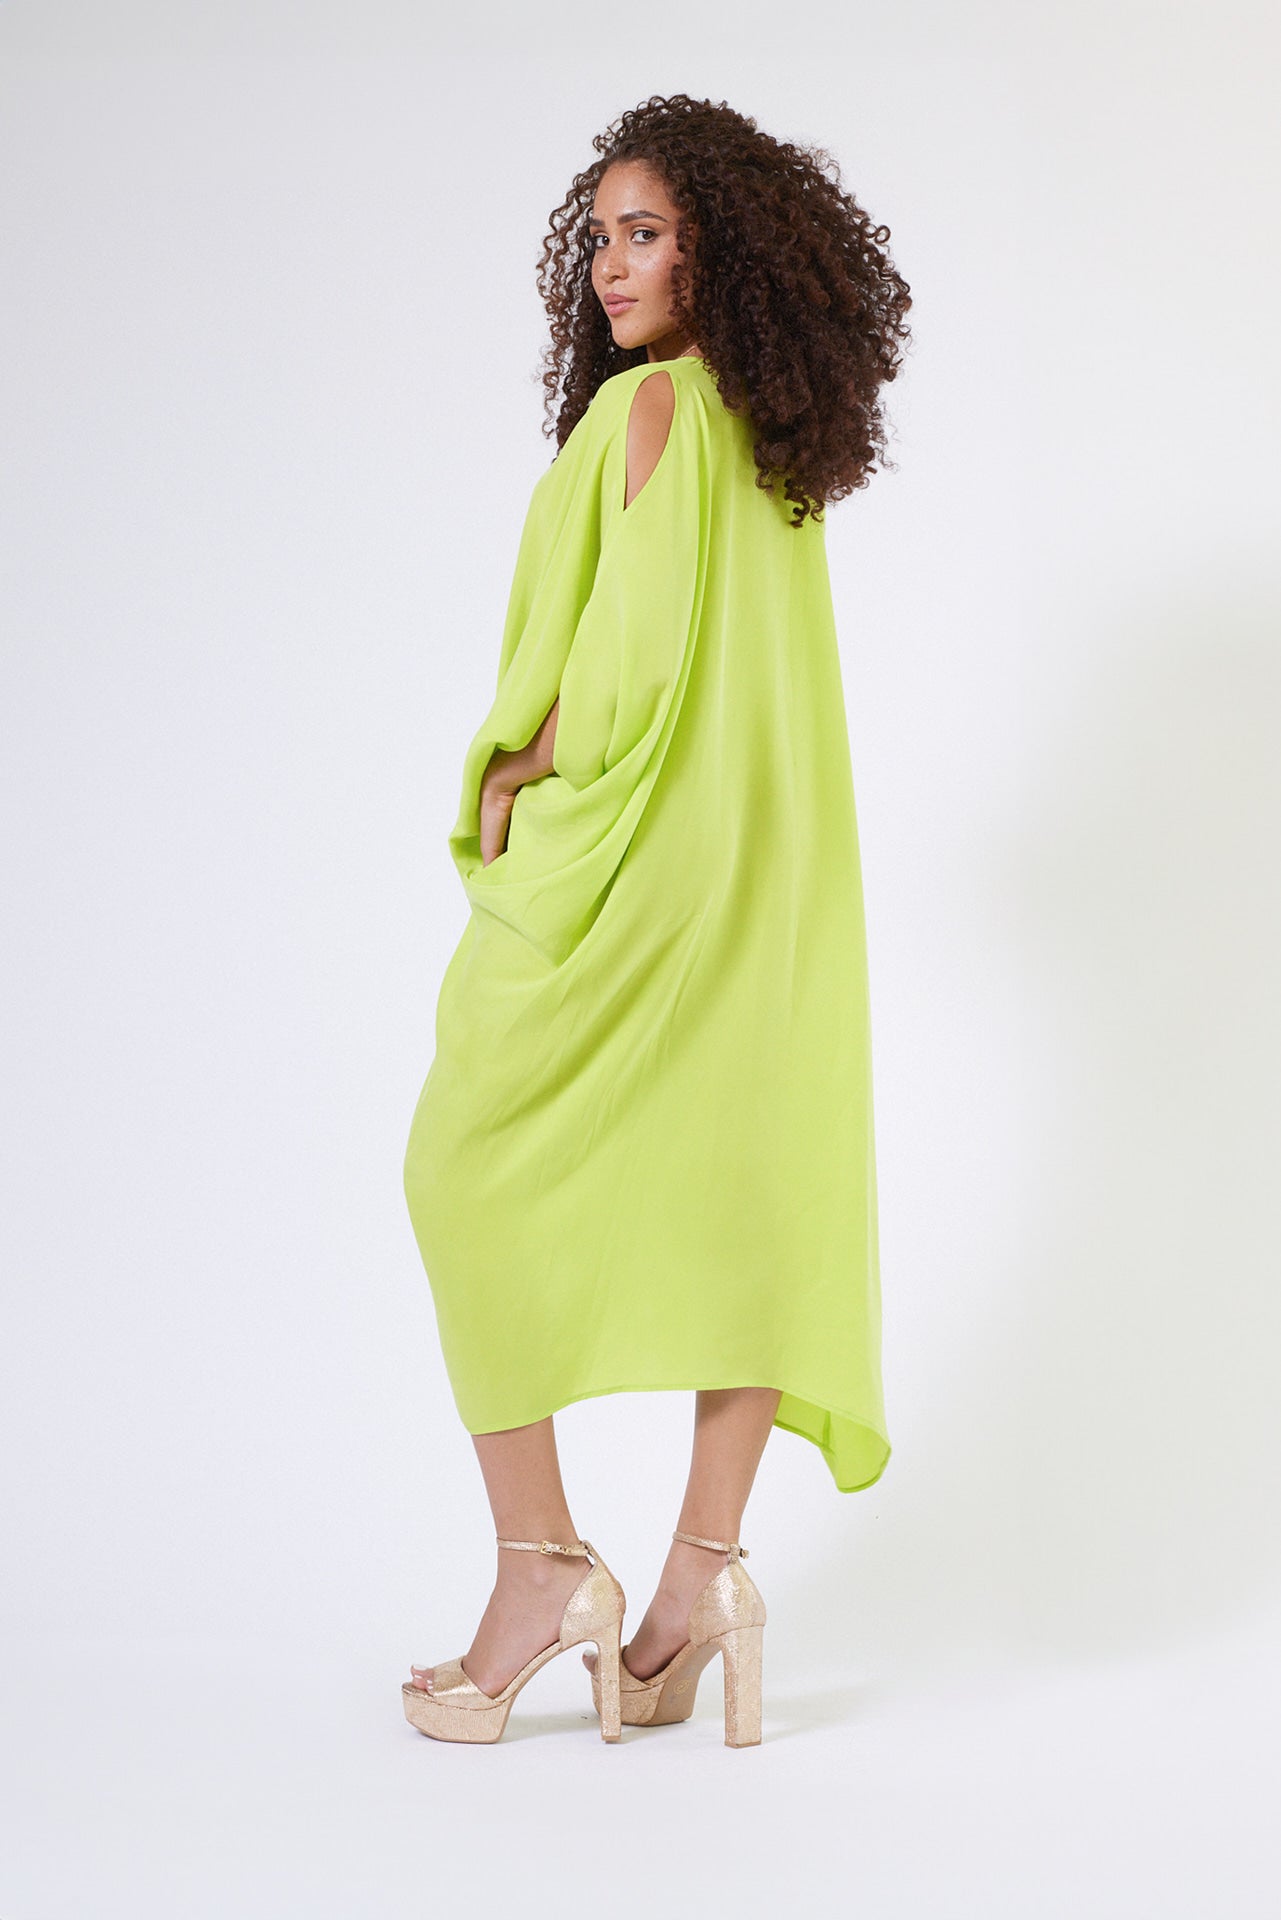 back view of woman wearing bright yellow kaftan duster with front zipper made from recycled materials